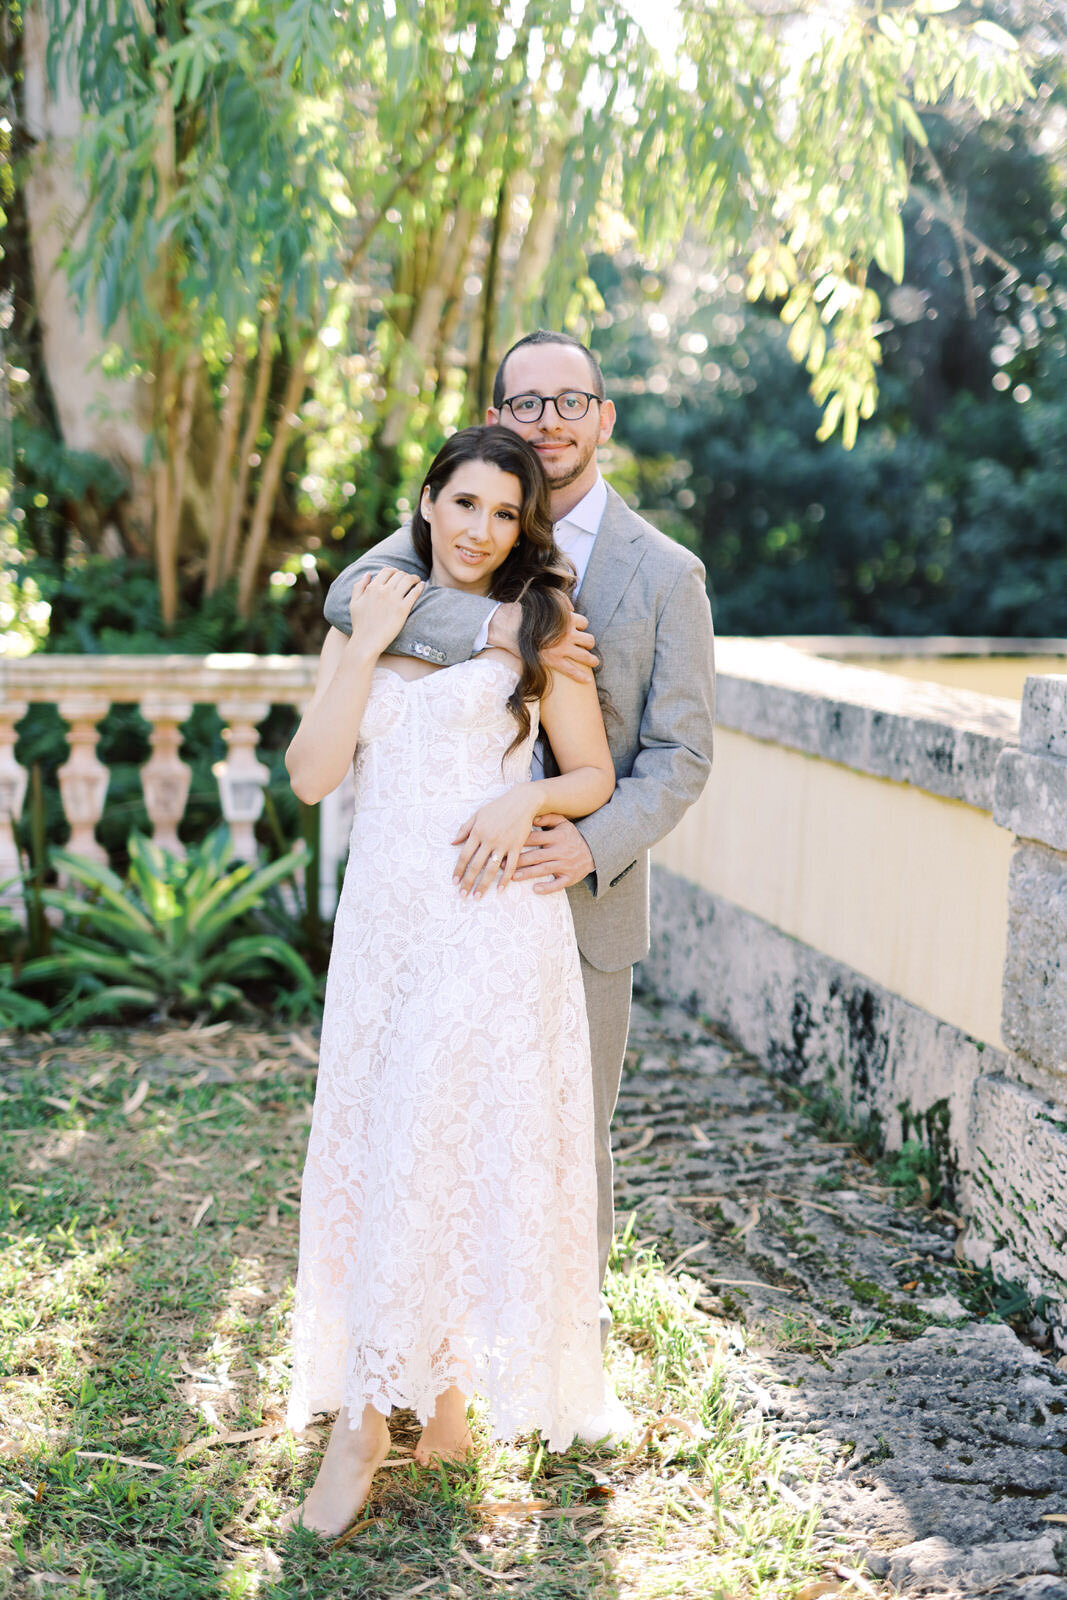 A Stylish and Chic Engagement Session at Vizcaya Museum in Miami Florida 3